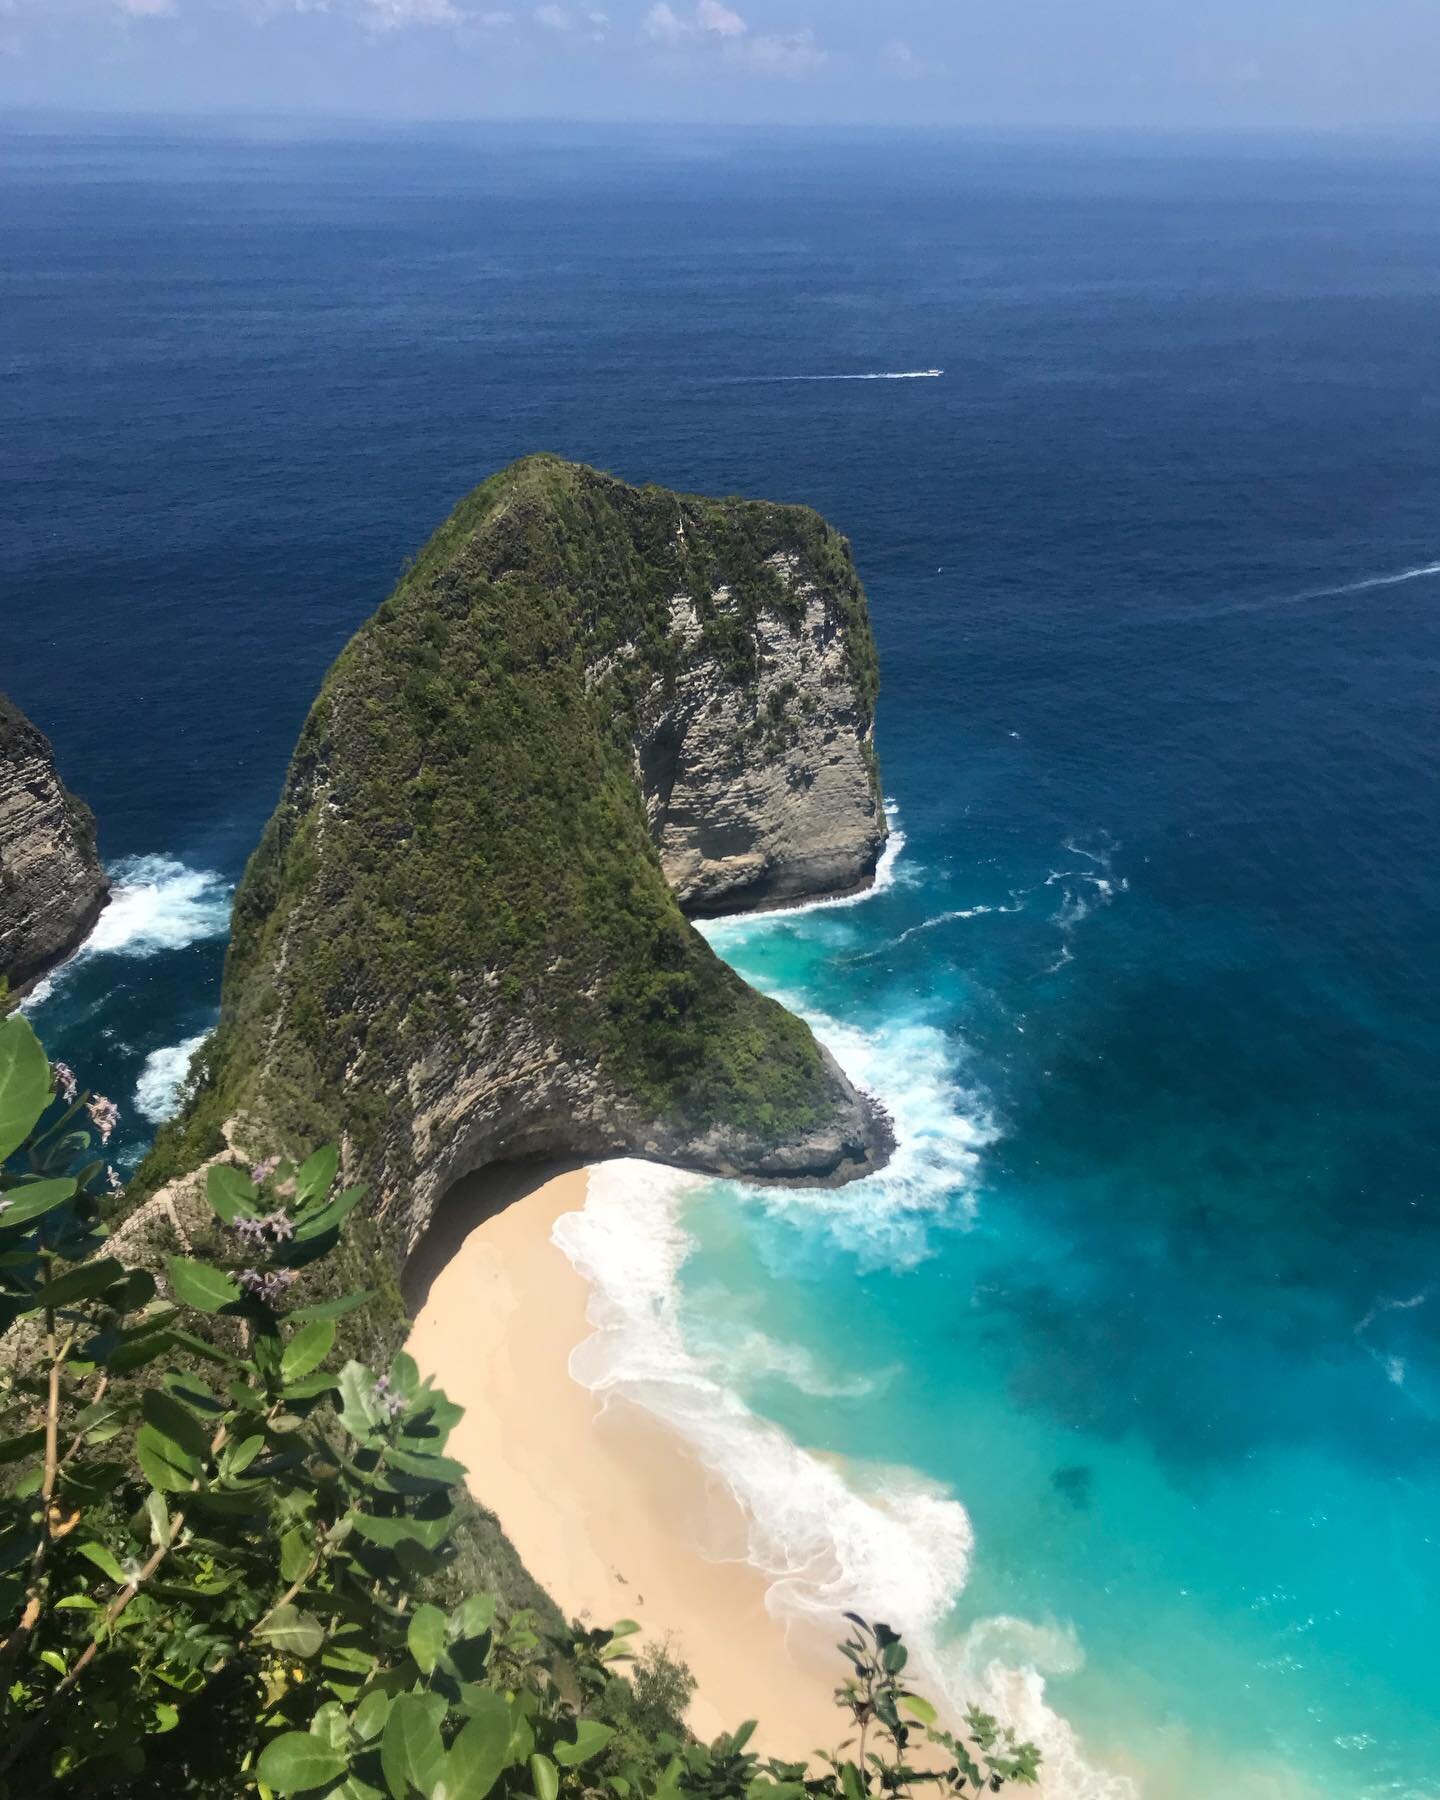 Exploring Nusa penida was a experience one of a kind. With a Scooter you get to See the Island and the Palm trees. One Highlight was the kelinking beach. The view was amazing and the turquise water reflects the sun in a pretty way. But sadly it was v